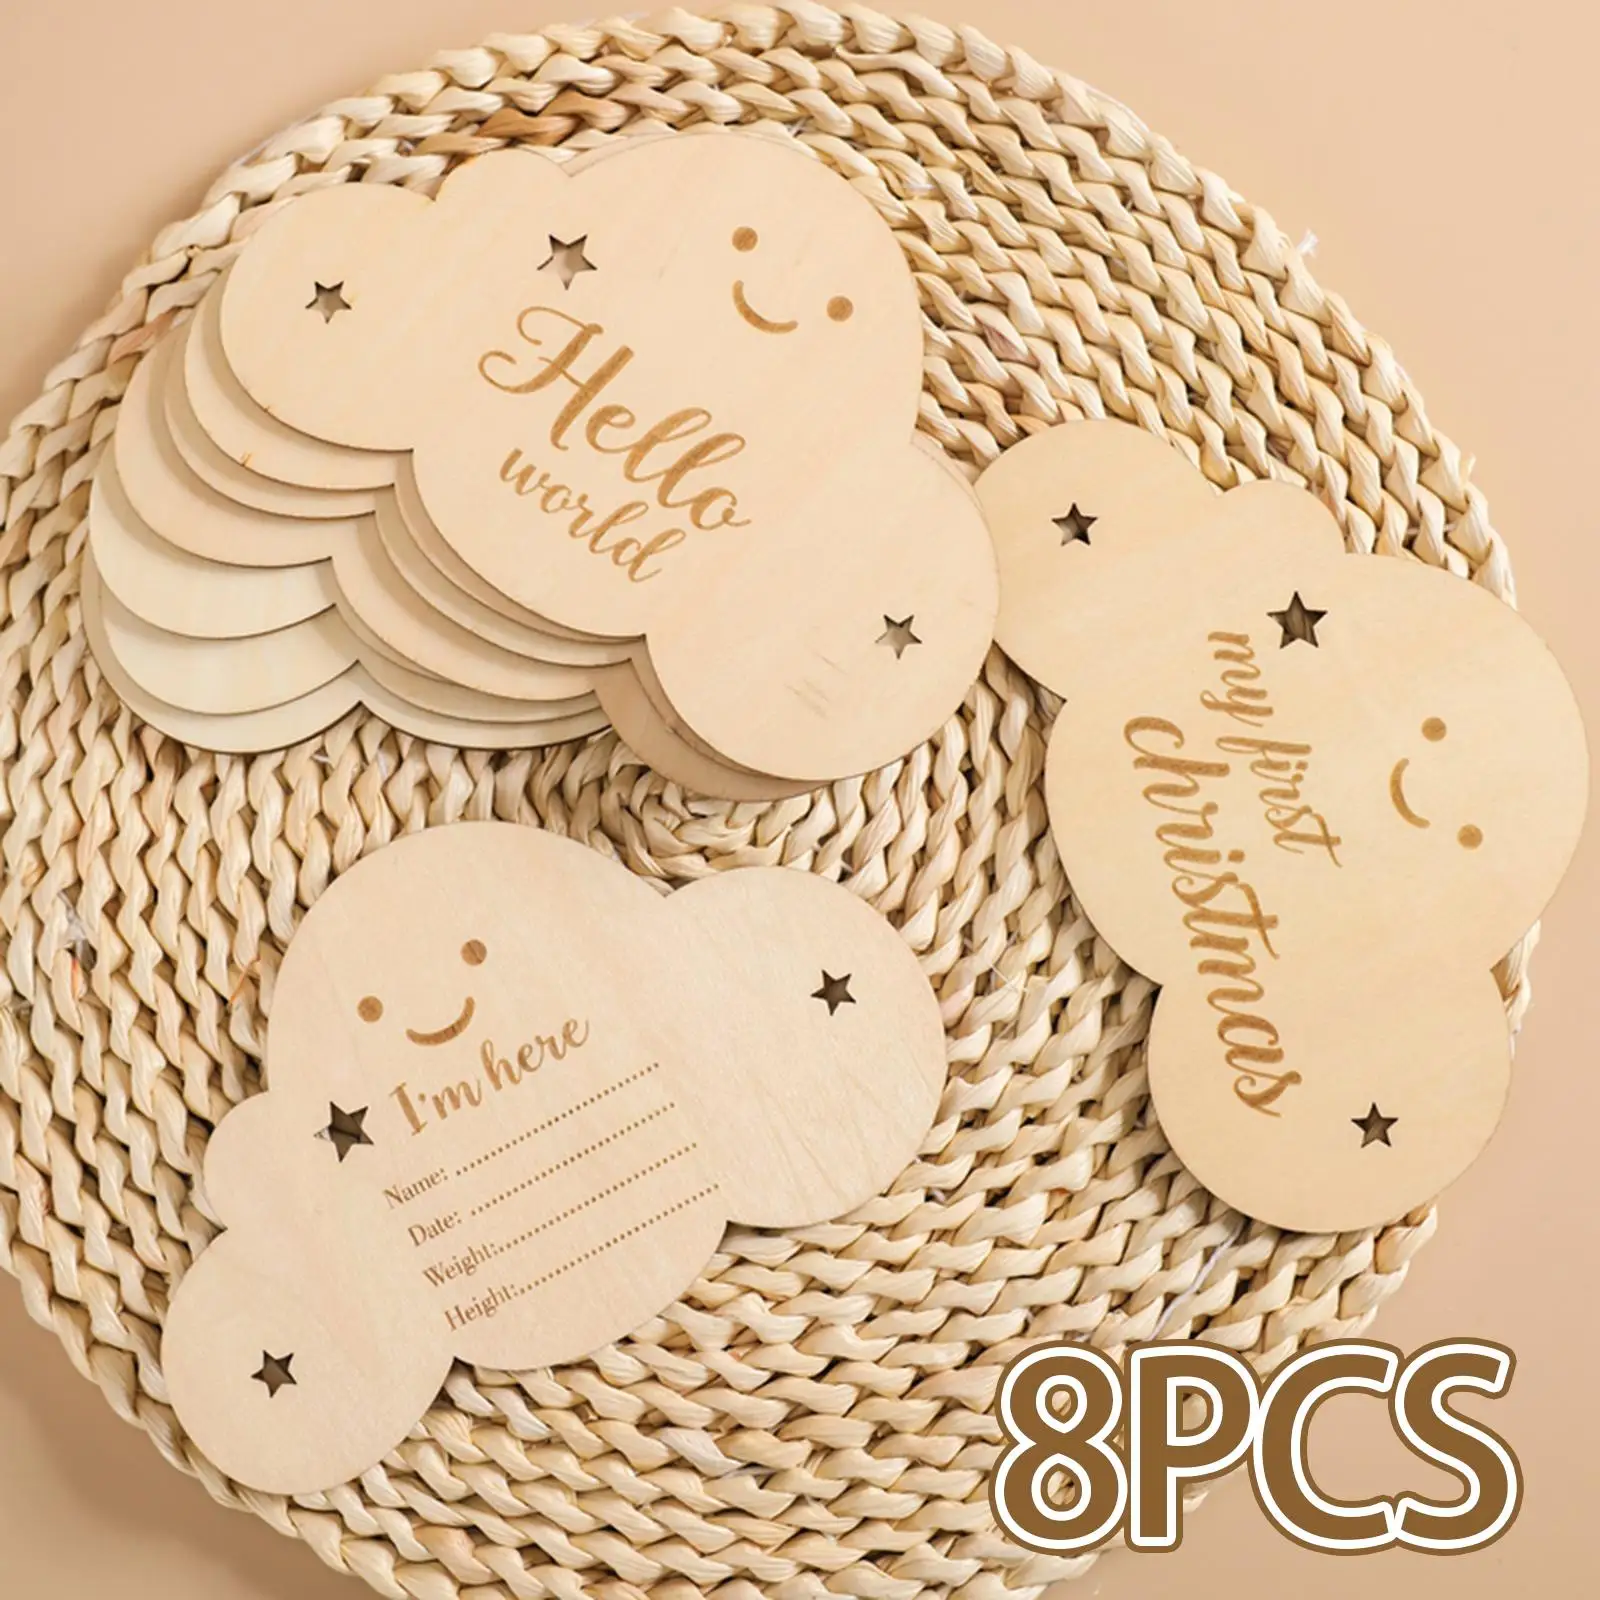 8x Baby Milestone Cards New Mom Gifts Engraved Clouds Shape Photography Accessories Newborn Gifts Double Sided Photo Prop Cards